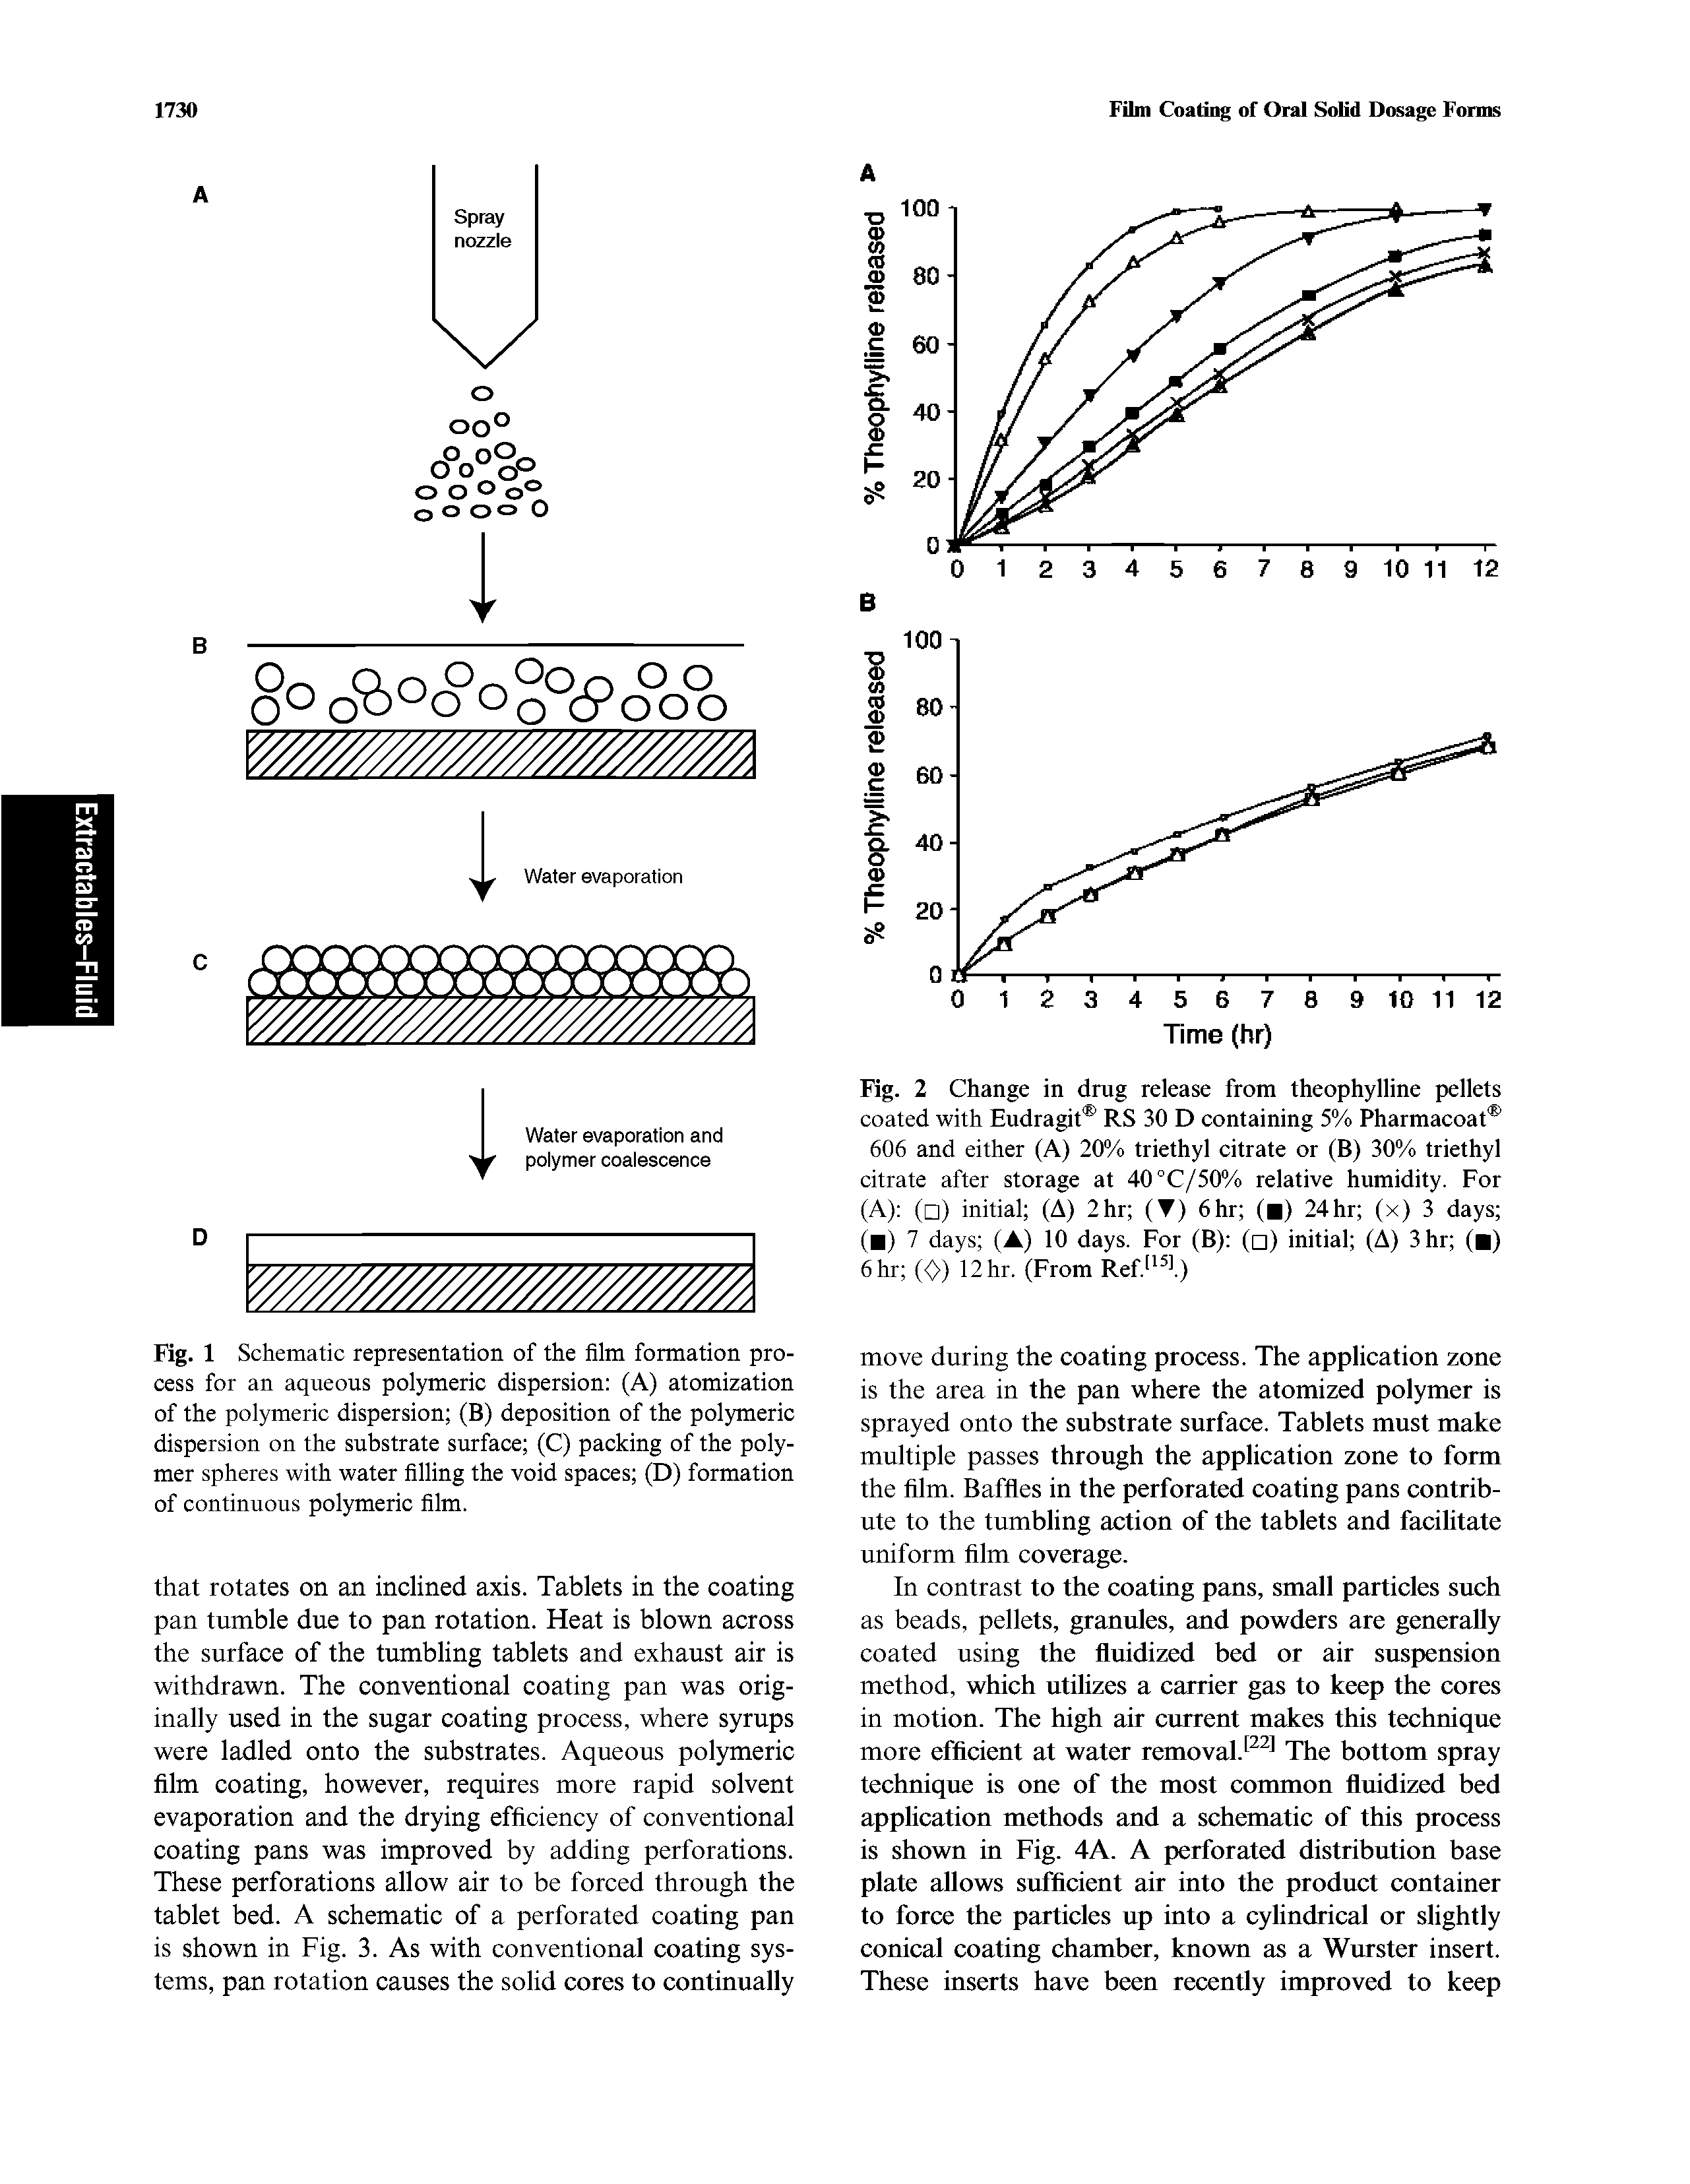 Fig. 2 Change in drug release from theophylline pellets coated with Eudragit RS 30 D containing 5% Pharmacoat 606 and either (A) 20% triethyl citrate or (B) 30% triethyl citrate after storage at 40°C/50% relative humidity. For (A) ( ) initial (A) 2 hr (T) 6 hr ( ) 24hr (x) 3 days ( ) 7 days (A) 10 days. For (B) ( ) initial (A) 3 hr ( ) 6 hr (0) 12 hr. (From Ref> l)...